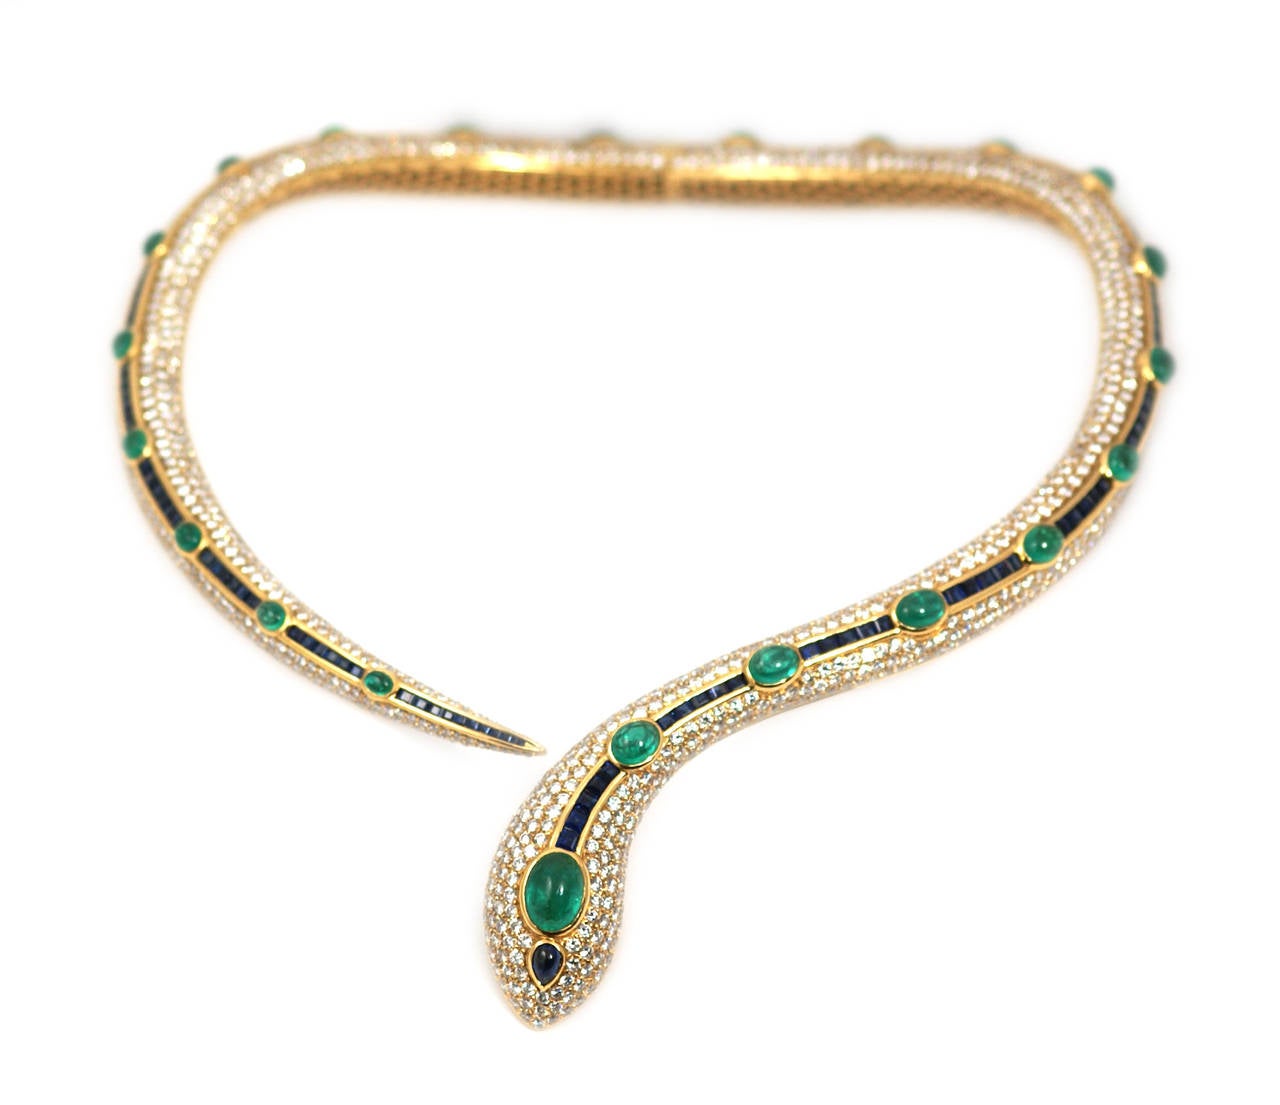 An important snake set comprised of necklace, bracelet and earrings; embellished by fine quality cabochon emeralds, sapphires and diamonds. Italy, circa 1980.